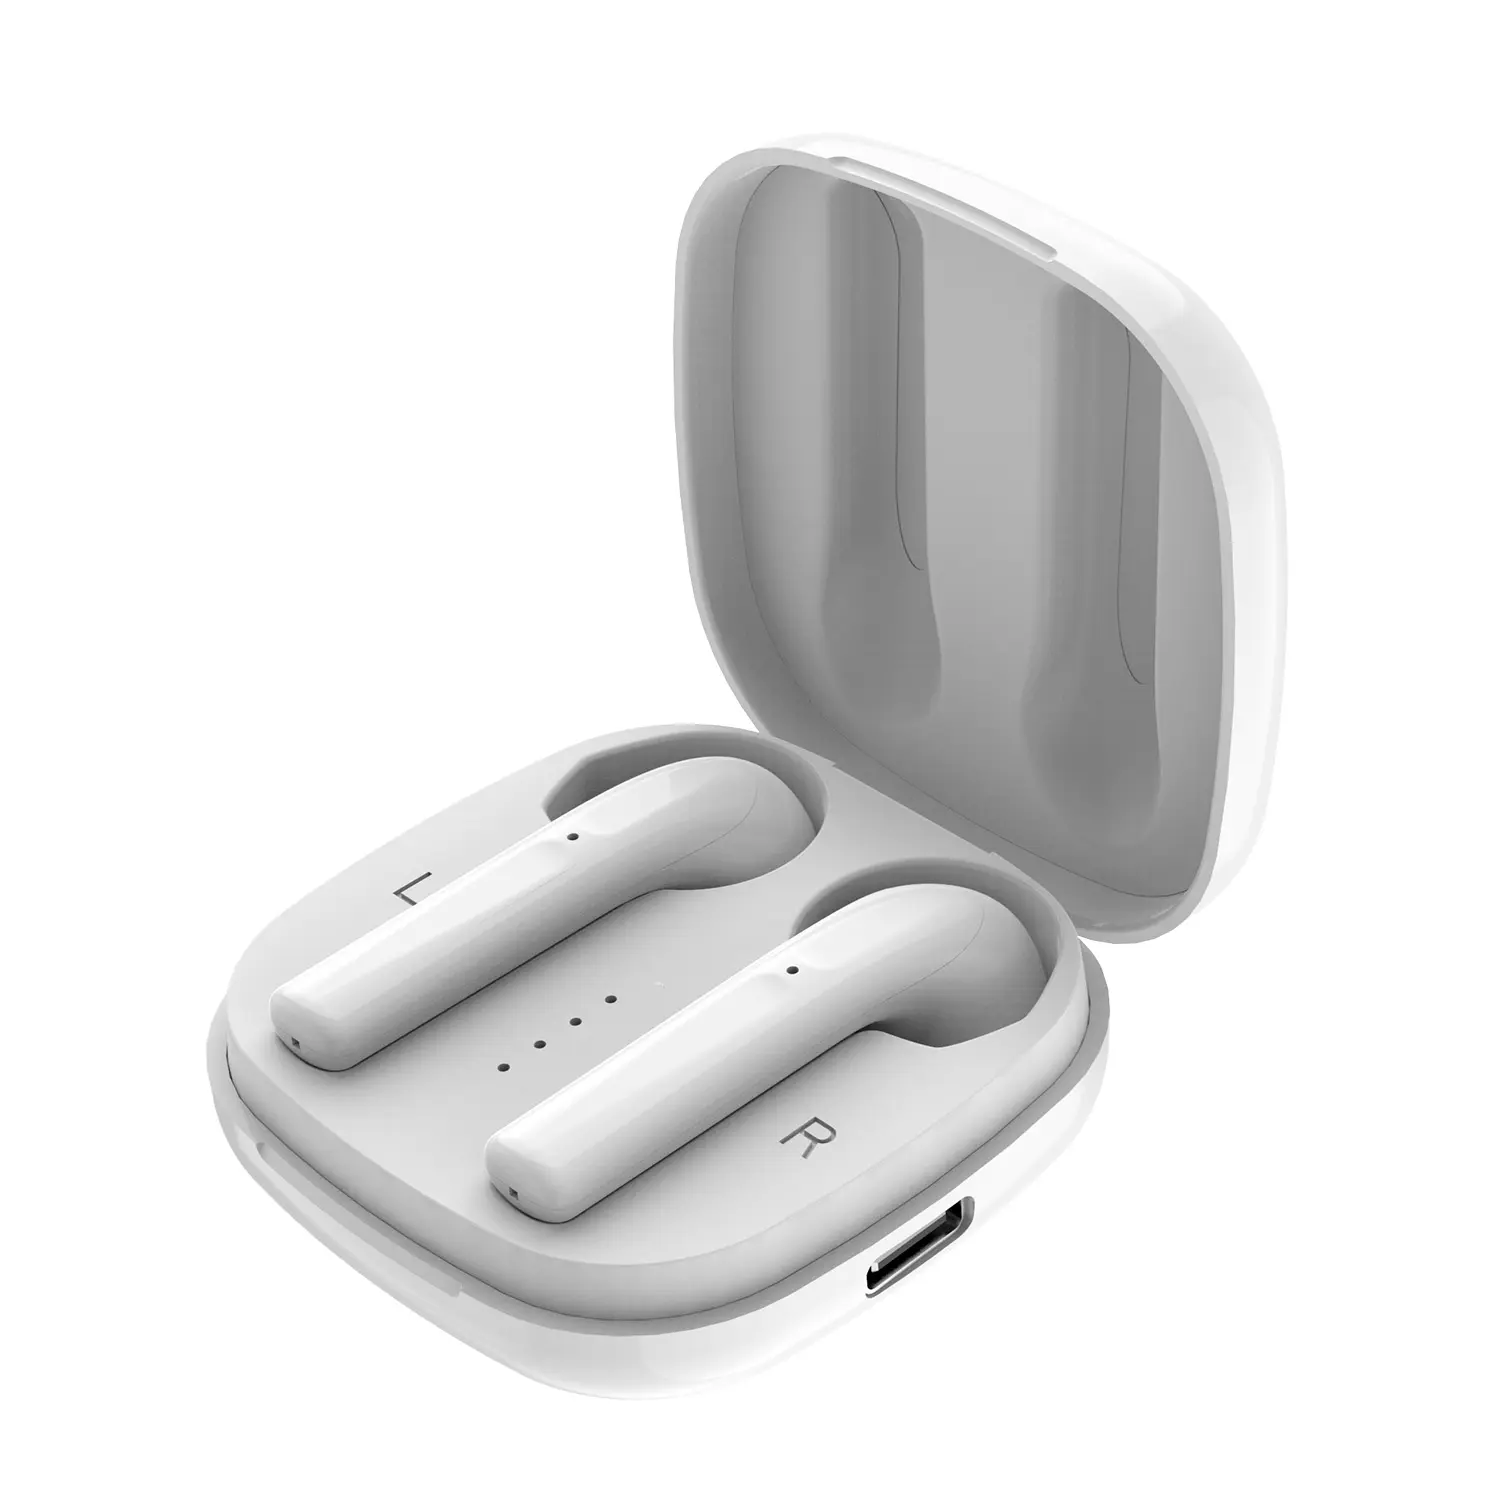 Wireless Noise Cancelling Earbuds Oem Wholesale Noise Canceling Wireless Headset Earphones Waterproof Hot Selling Bluetooth Earbuds